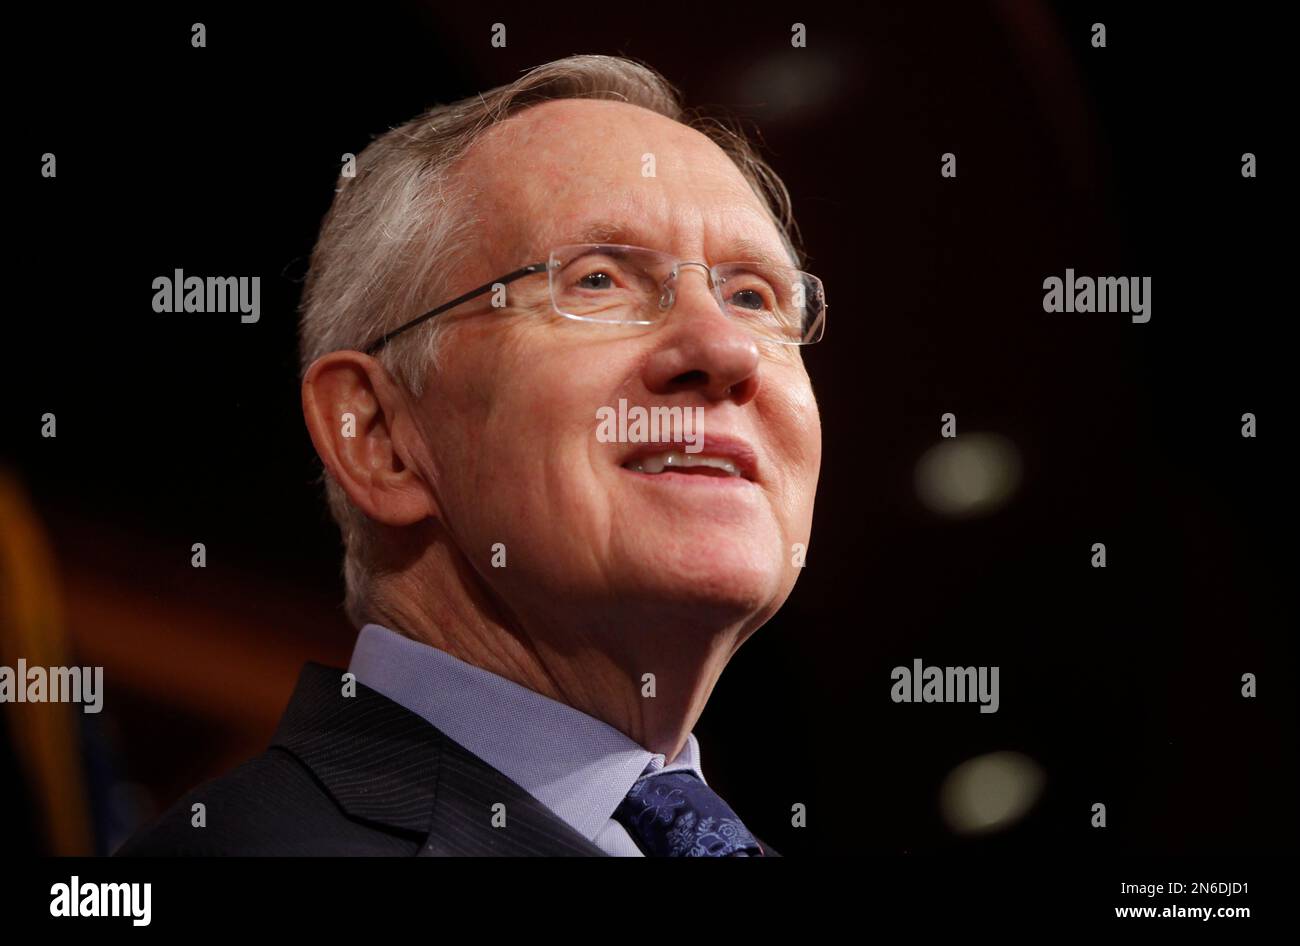 Senate Majority Leader Harry Reid of Nevada listens to a reporter's question about their meeting with Senate Republicans regarding the government shutdown and debt ceiling on Capitol Hill in Washington, Saturday, Oct. 12, 2013. (AP Photo/Charles Dharapak) Stock Photo